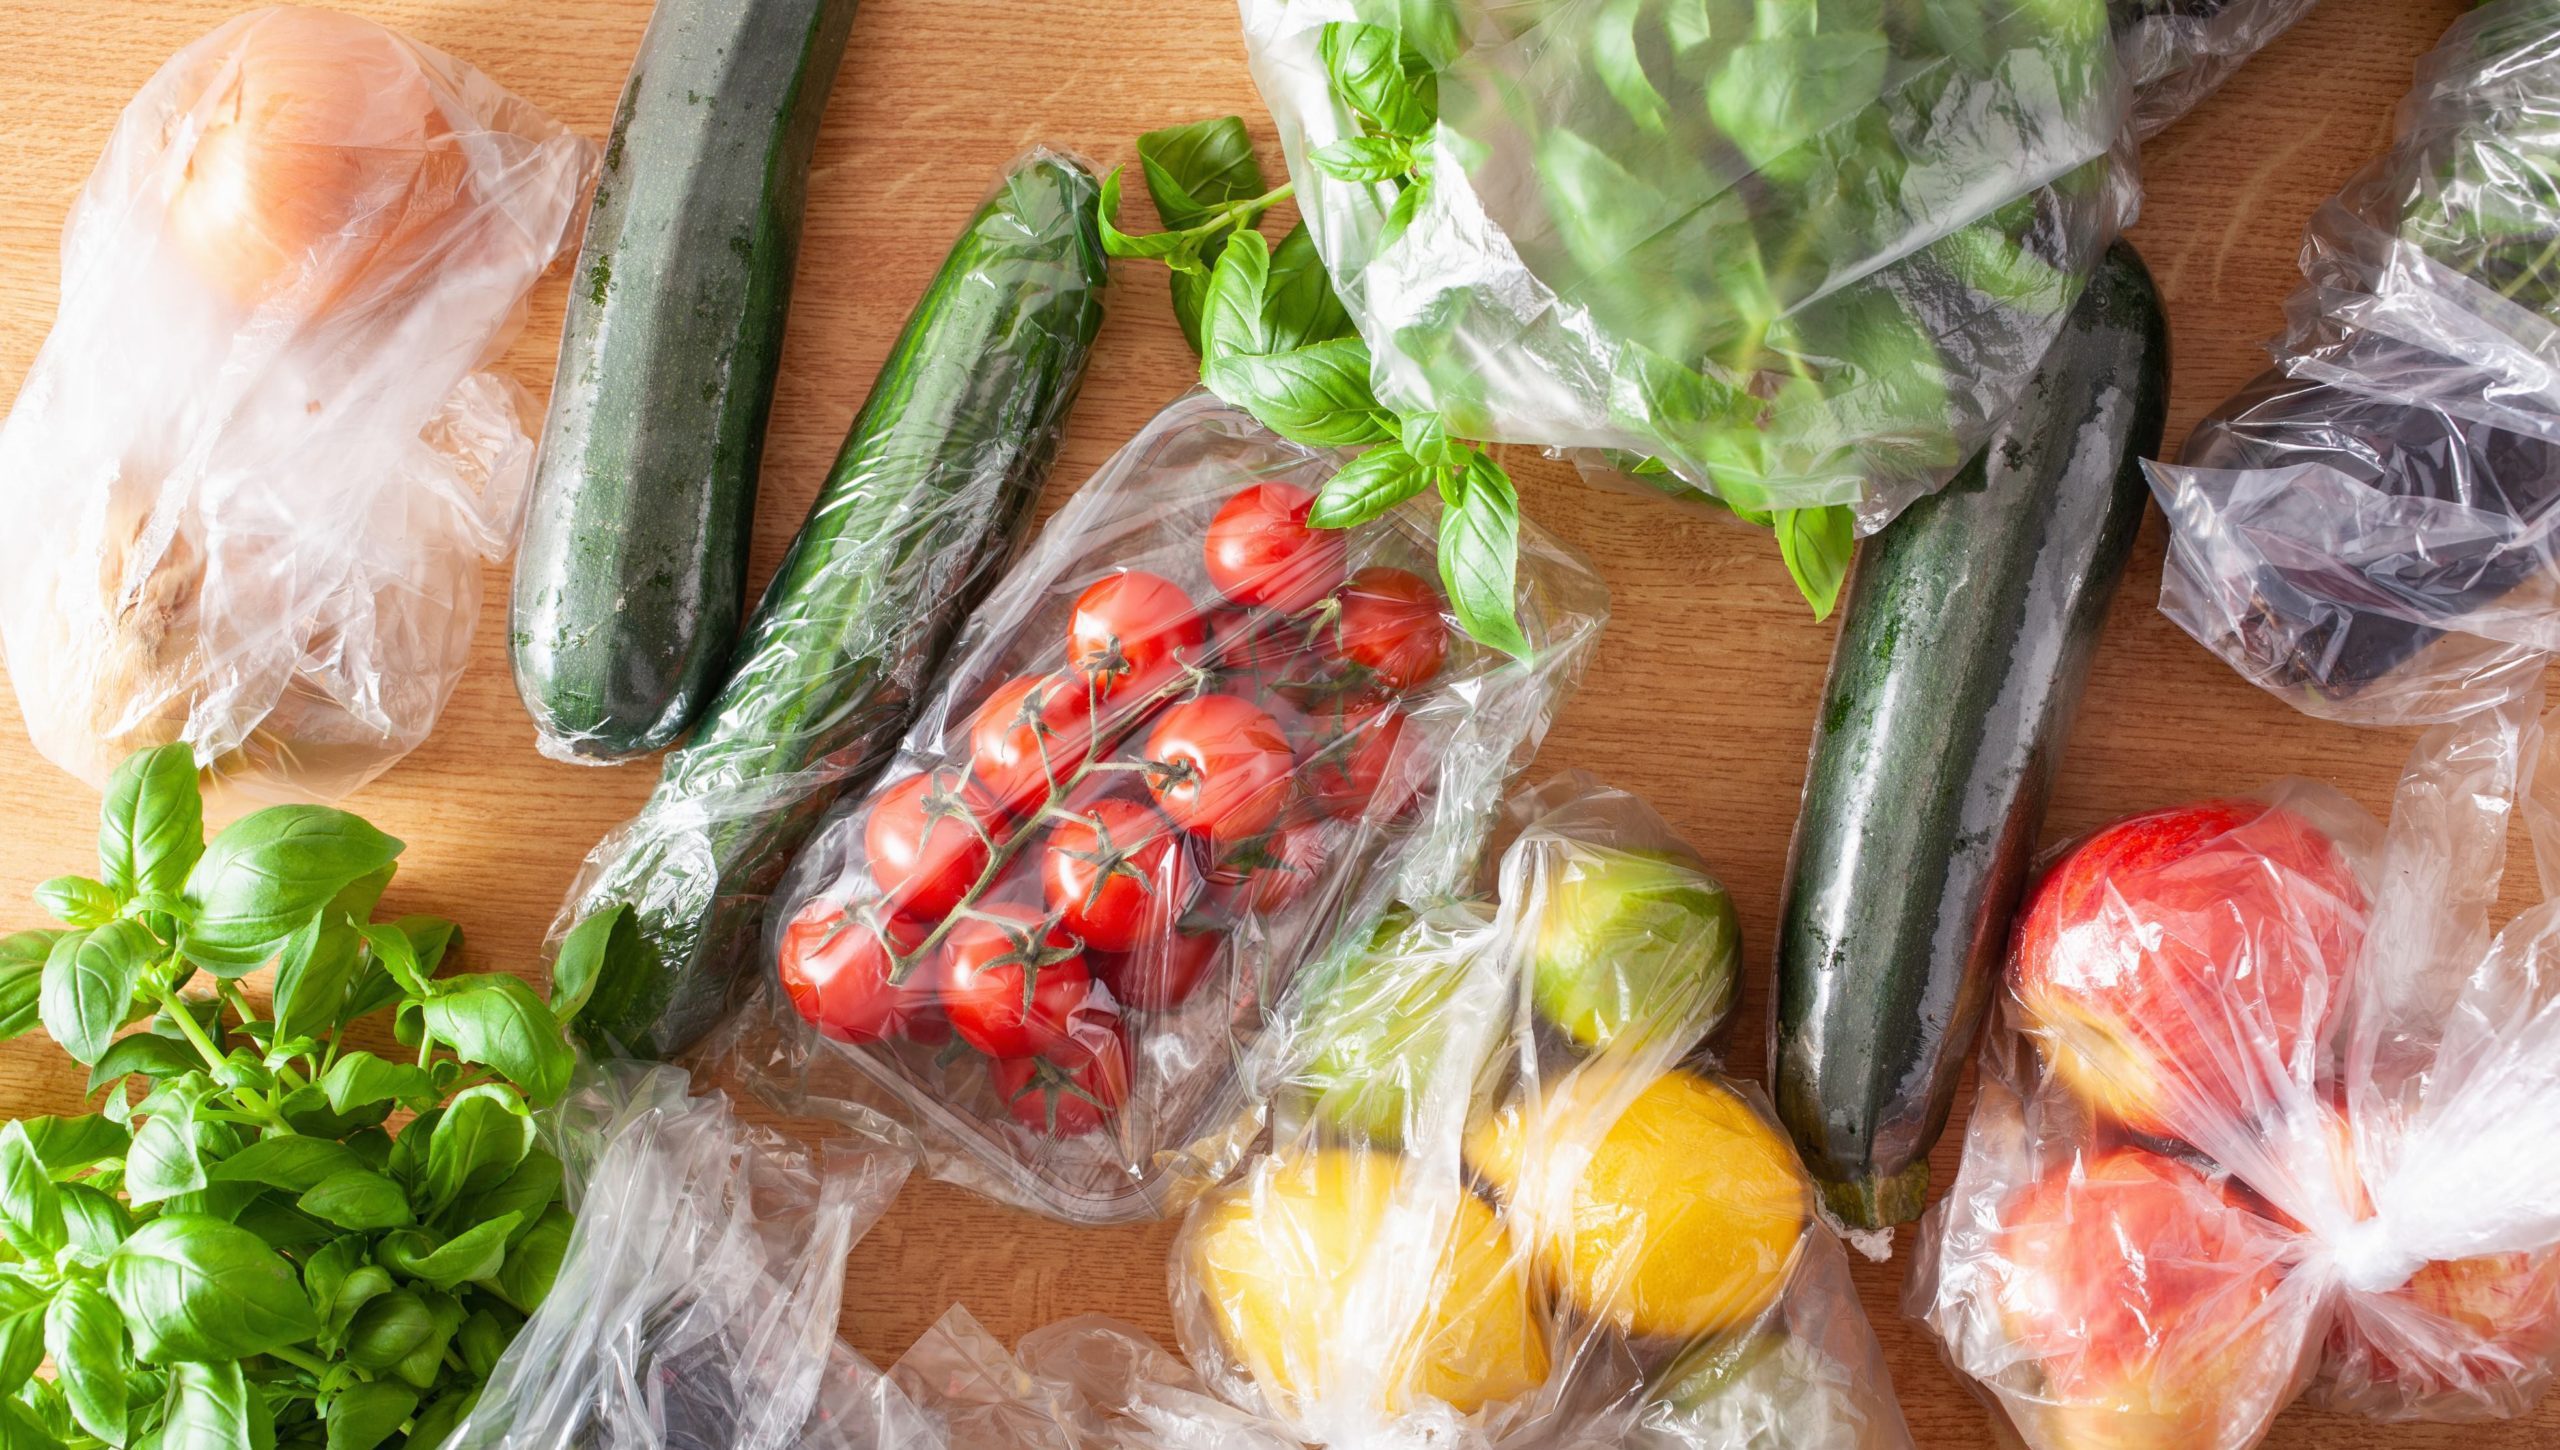 single use plastic packaging issue. fruits and vegetables in plastic bags